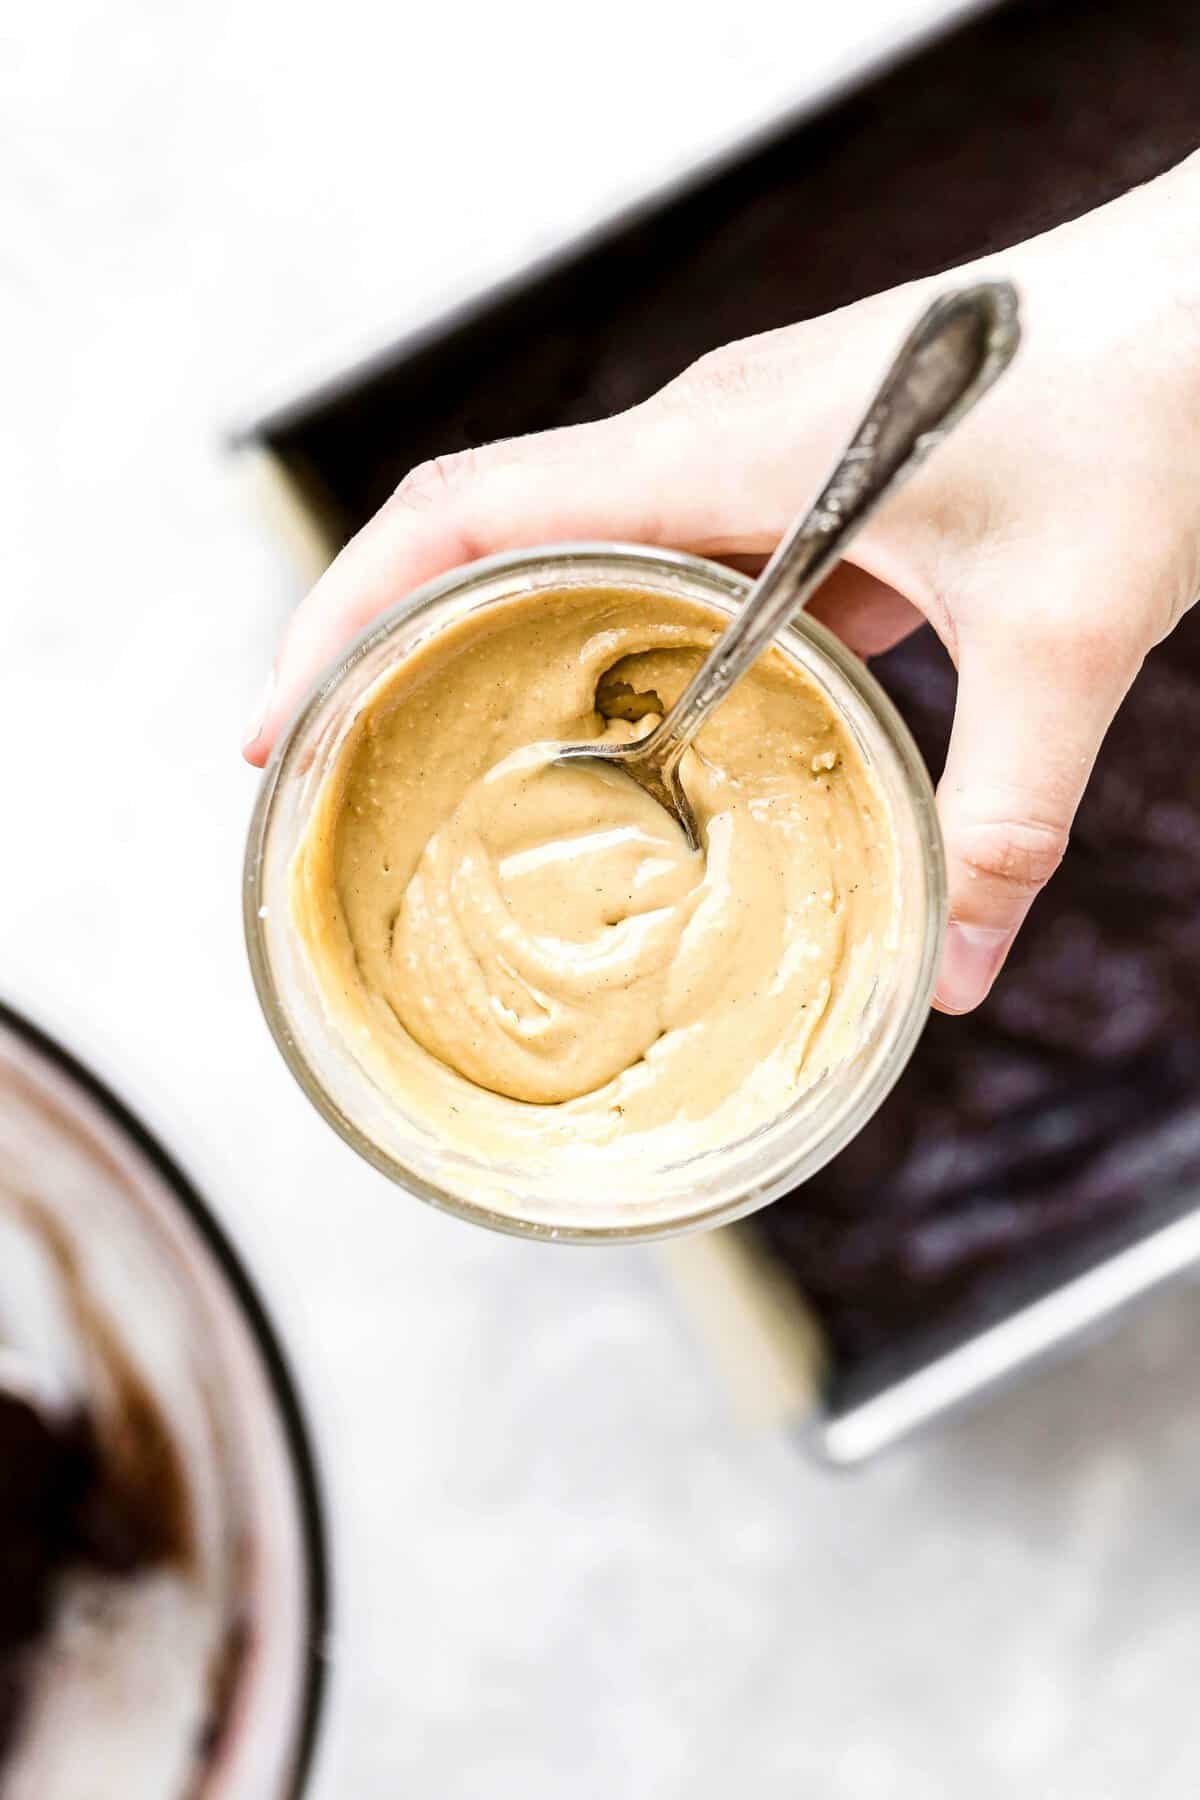 tahini and peanut butter for swirling into brownies